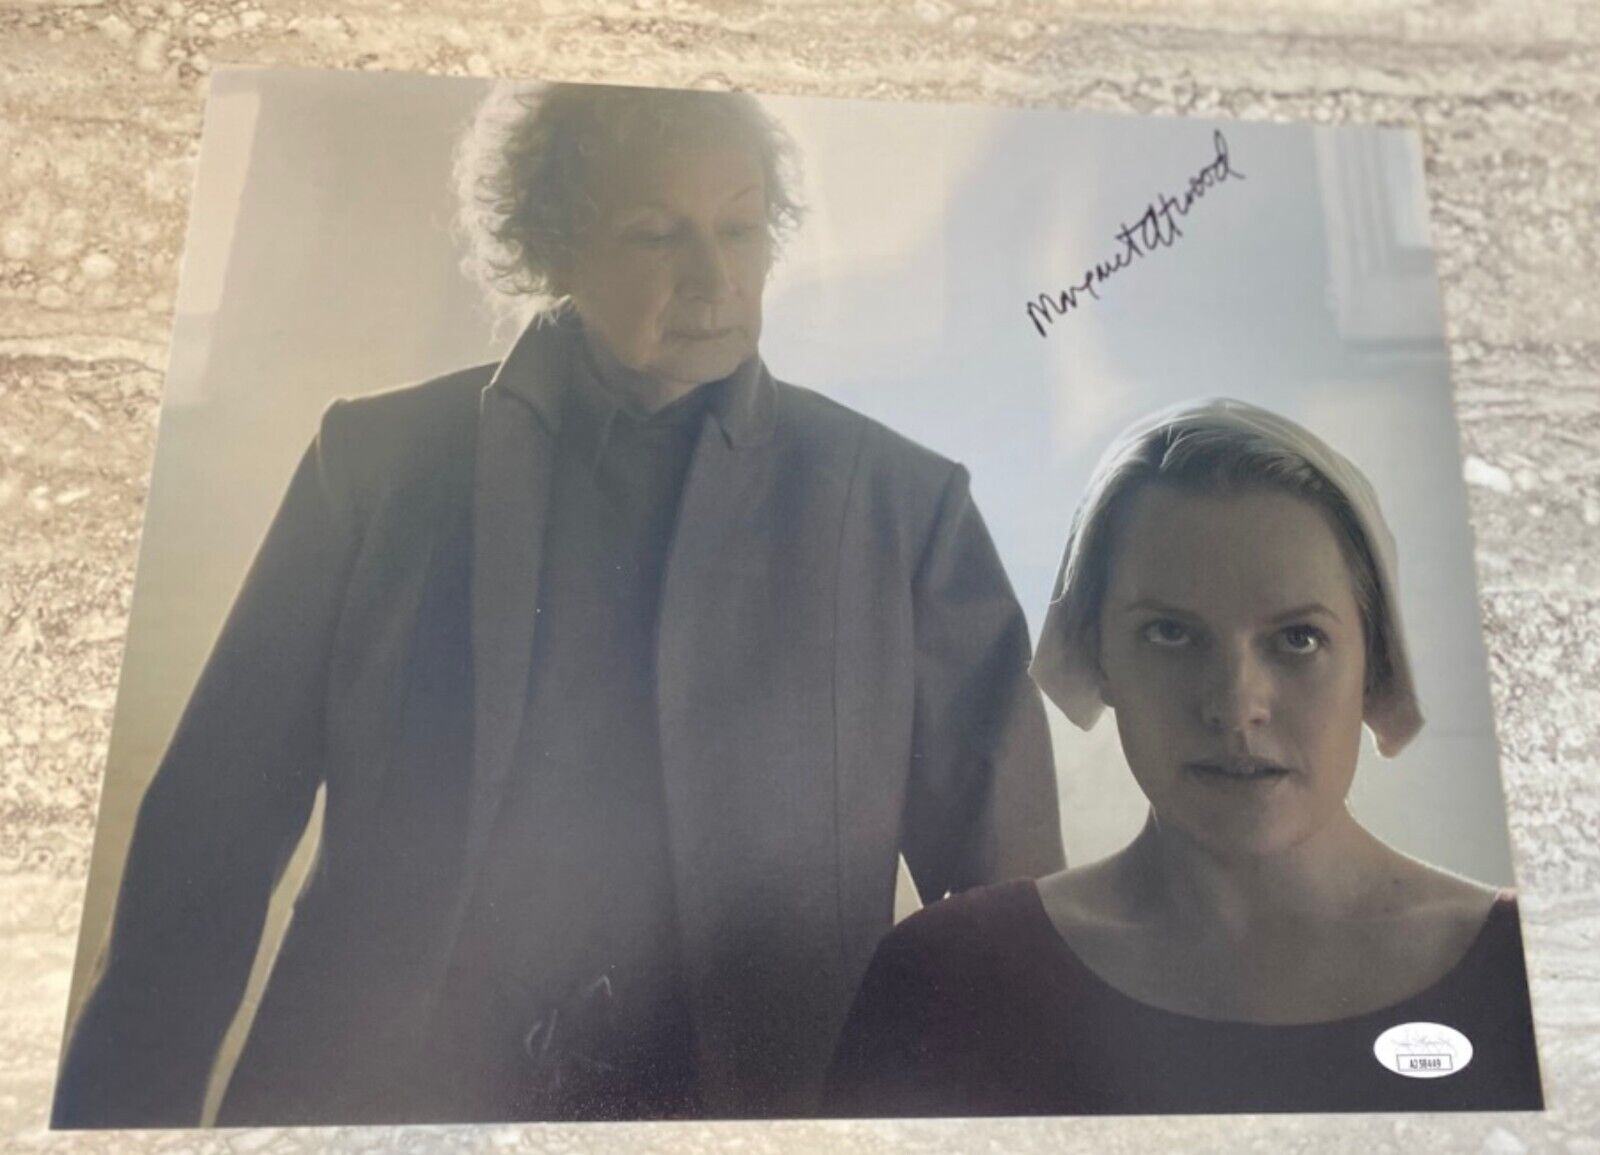 MARGARET ATWOOD SIGNED  THE HANDSMAID'S TALE 11X14 PHOTO JSA COA PROOF  #3